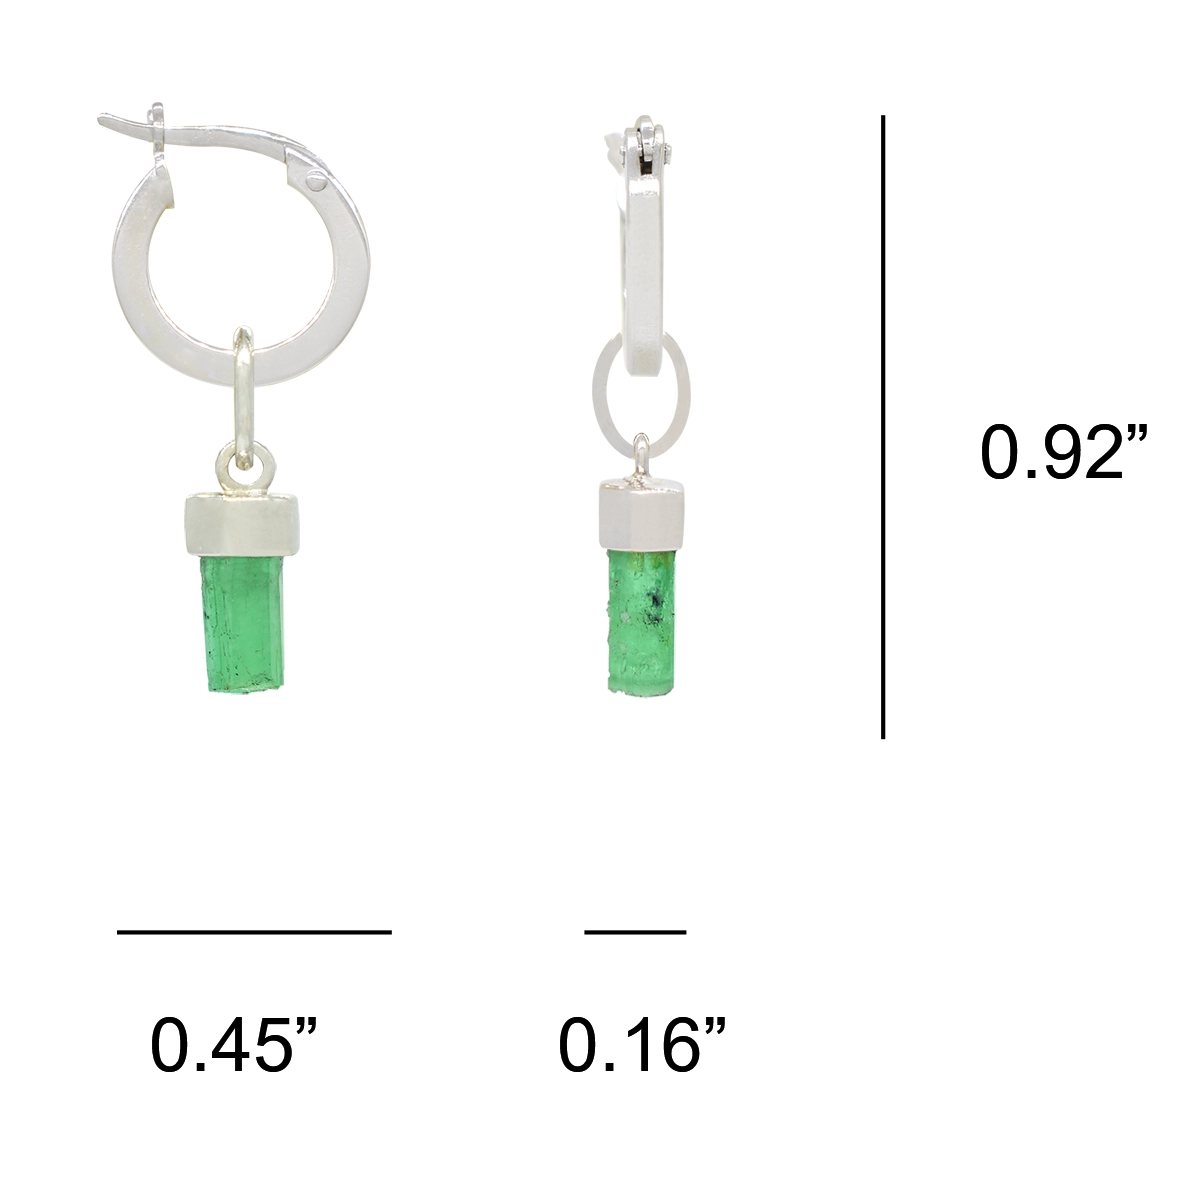 The dimensions of these dangle hoop earrings are 0.92 inches high by 0.45 deep by 0.16 wide, which make them a middle size drop earrings